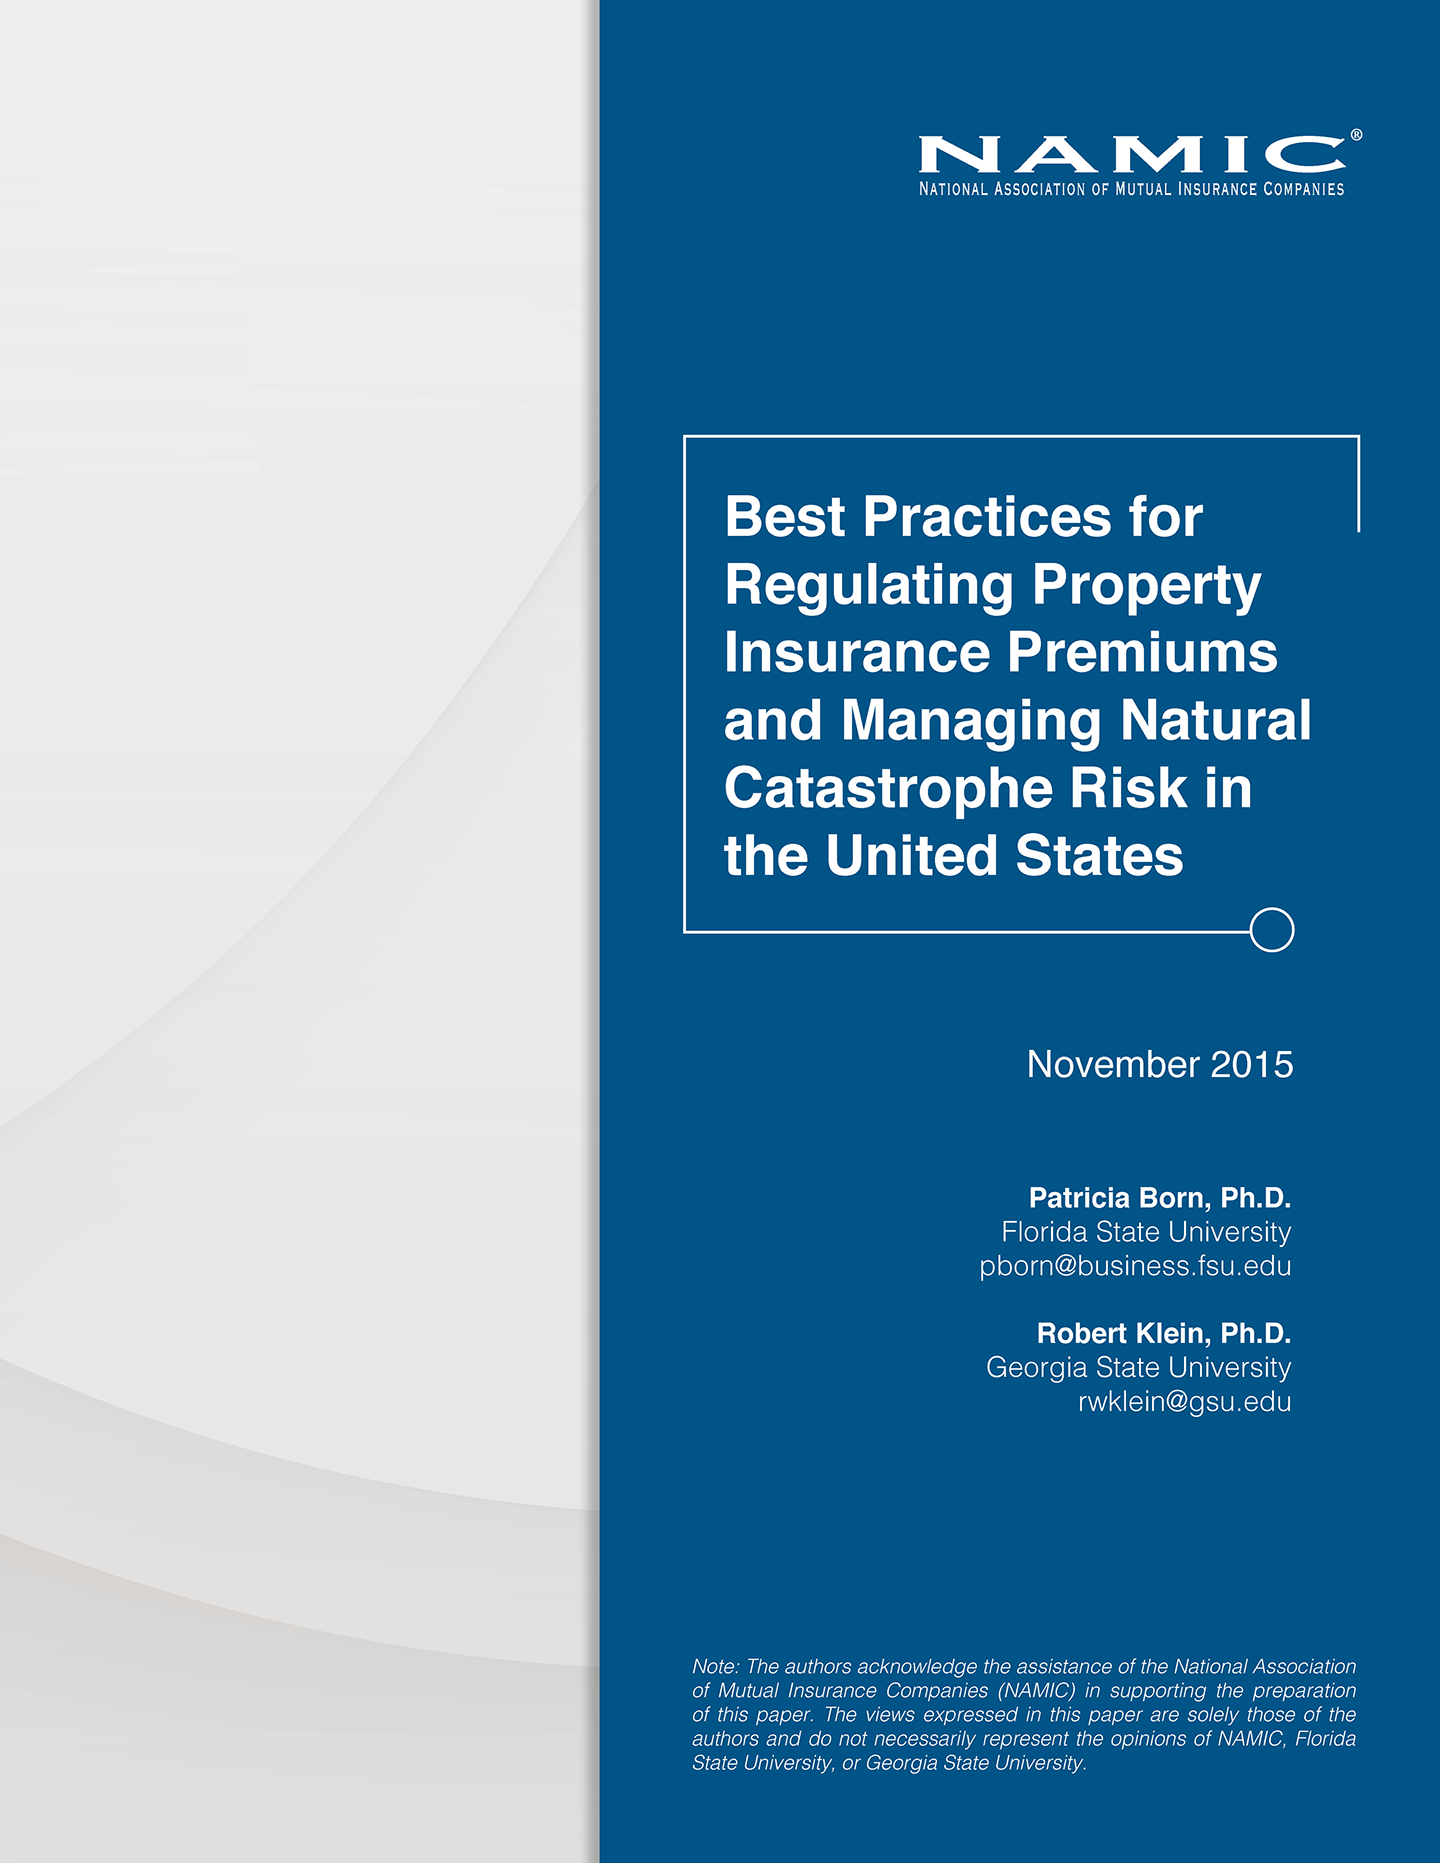 Best Practices for Regulating Property Insurance Premiums and Managing Natural Catastrophe Risk in the United States PDF